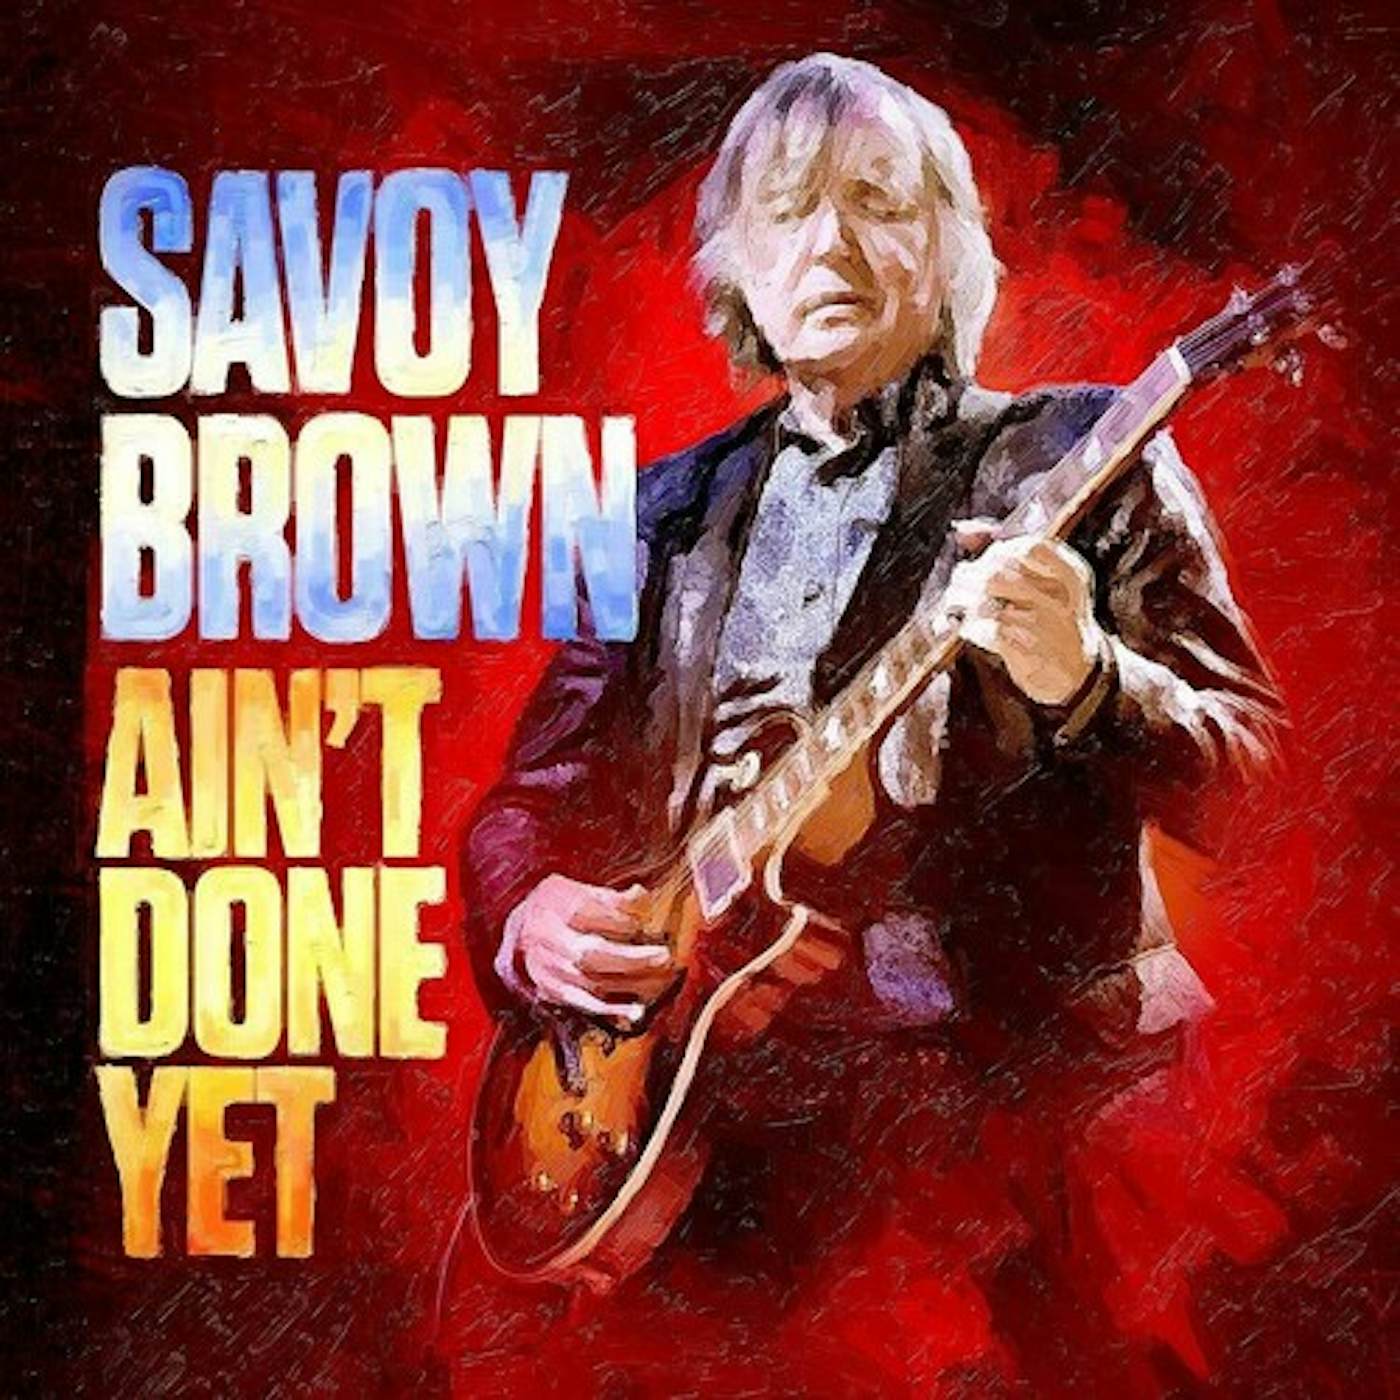 Savoy Brown AIN'T DONE YET CD